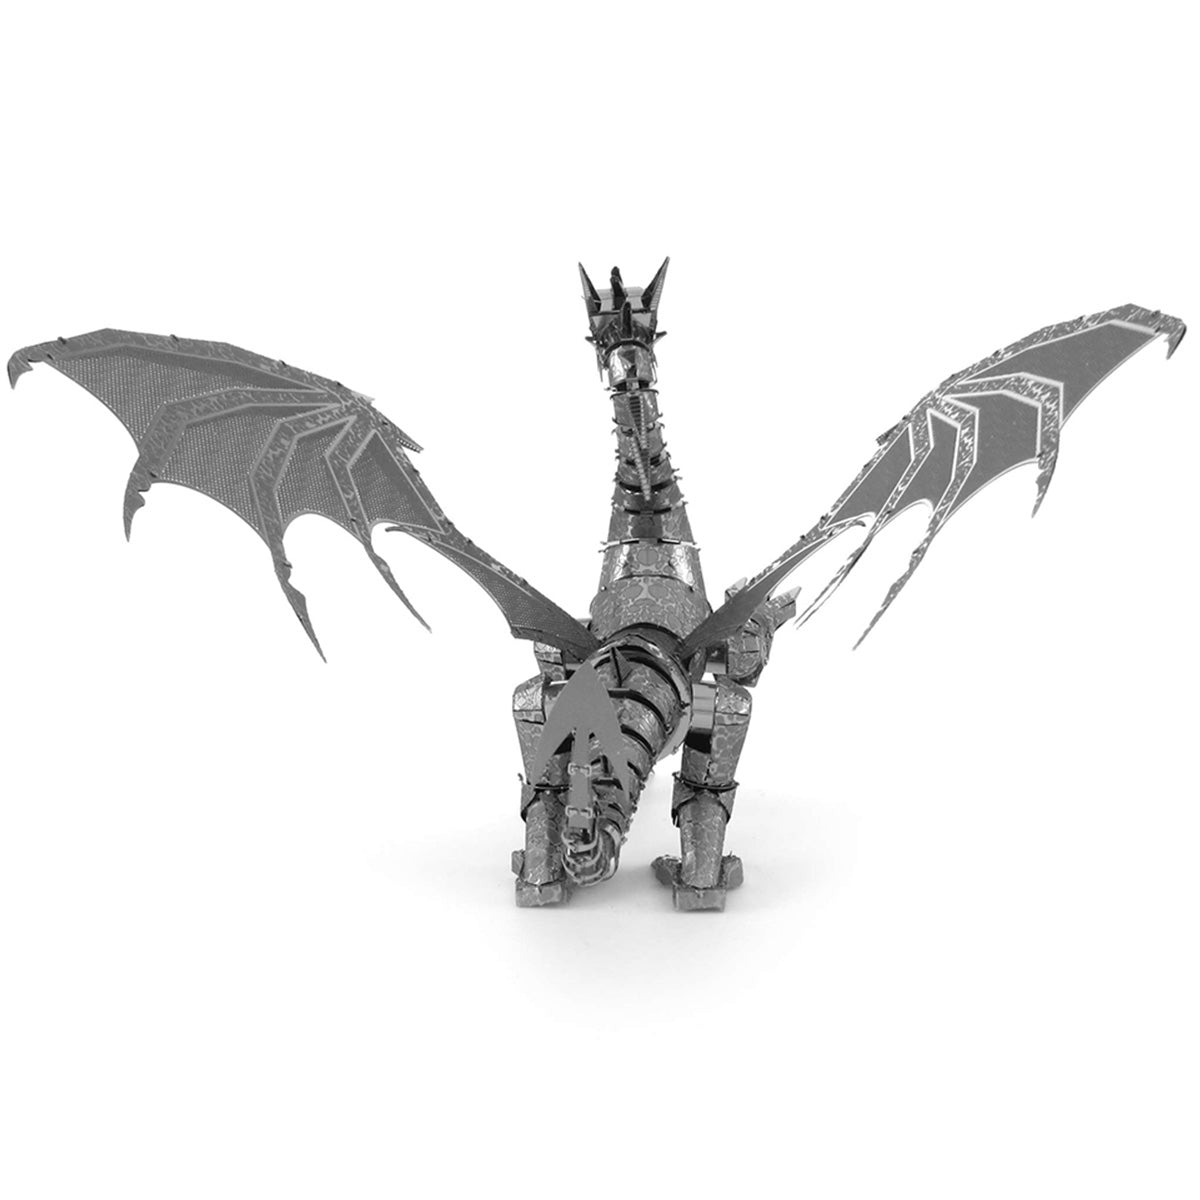 Rear view of a completed Silver Dragon from the steel model kit.